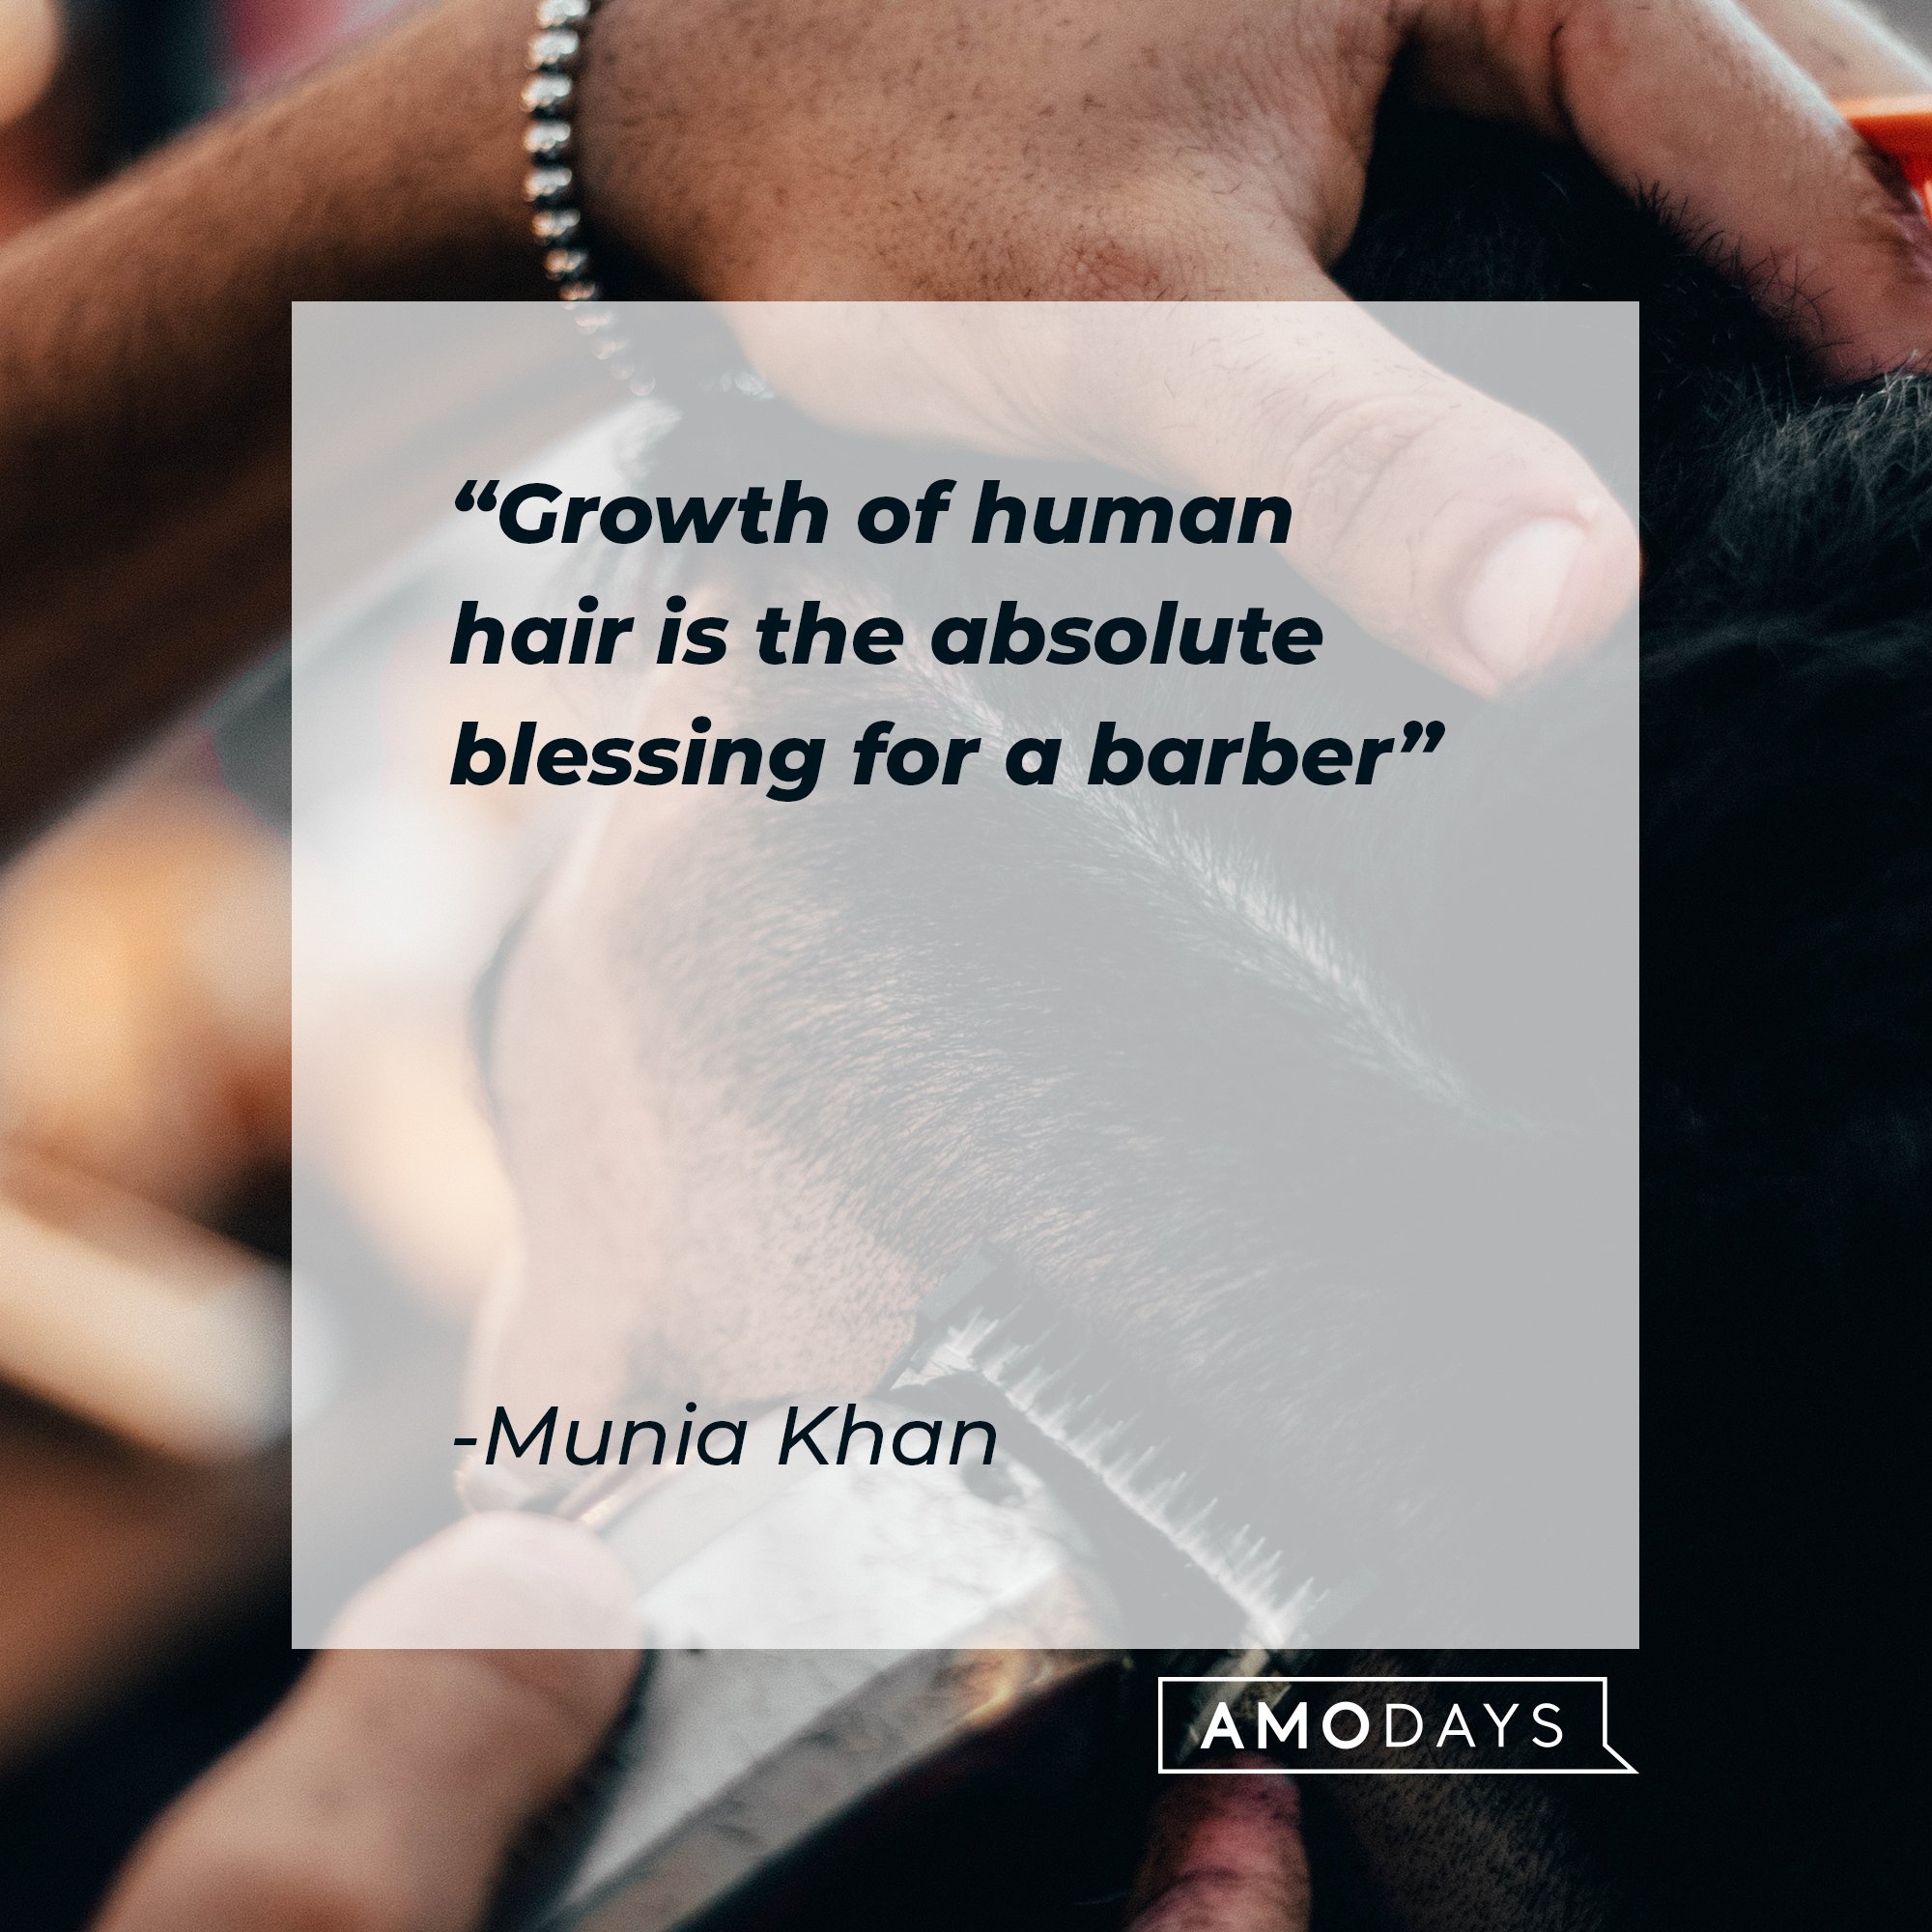 Munia Khan's quote: "Growth of human hair is the absolute blessing for a barber." | Image: AmoDays